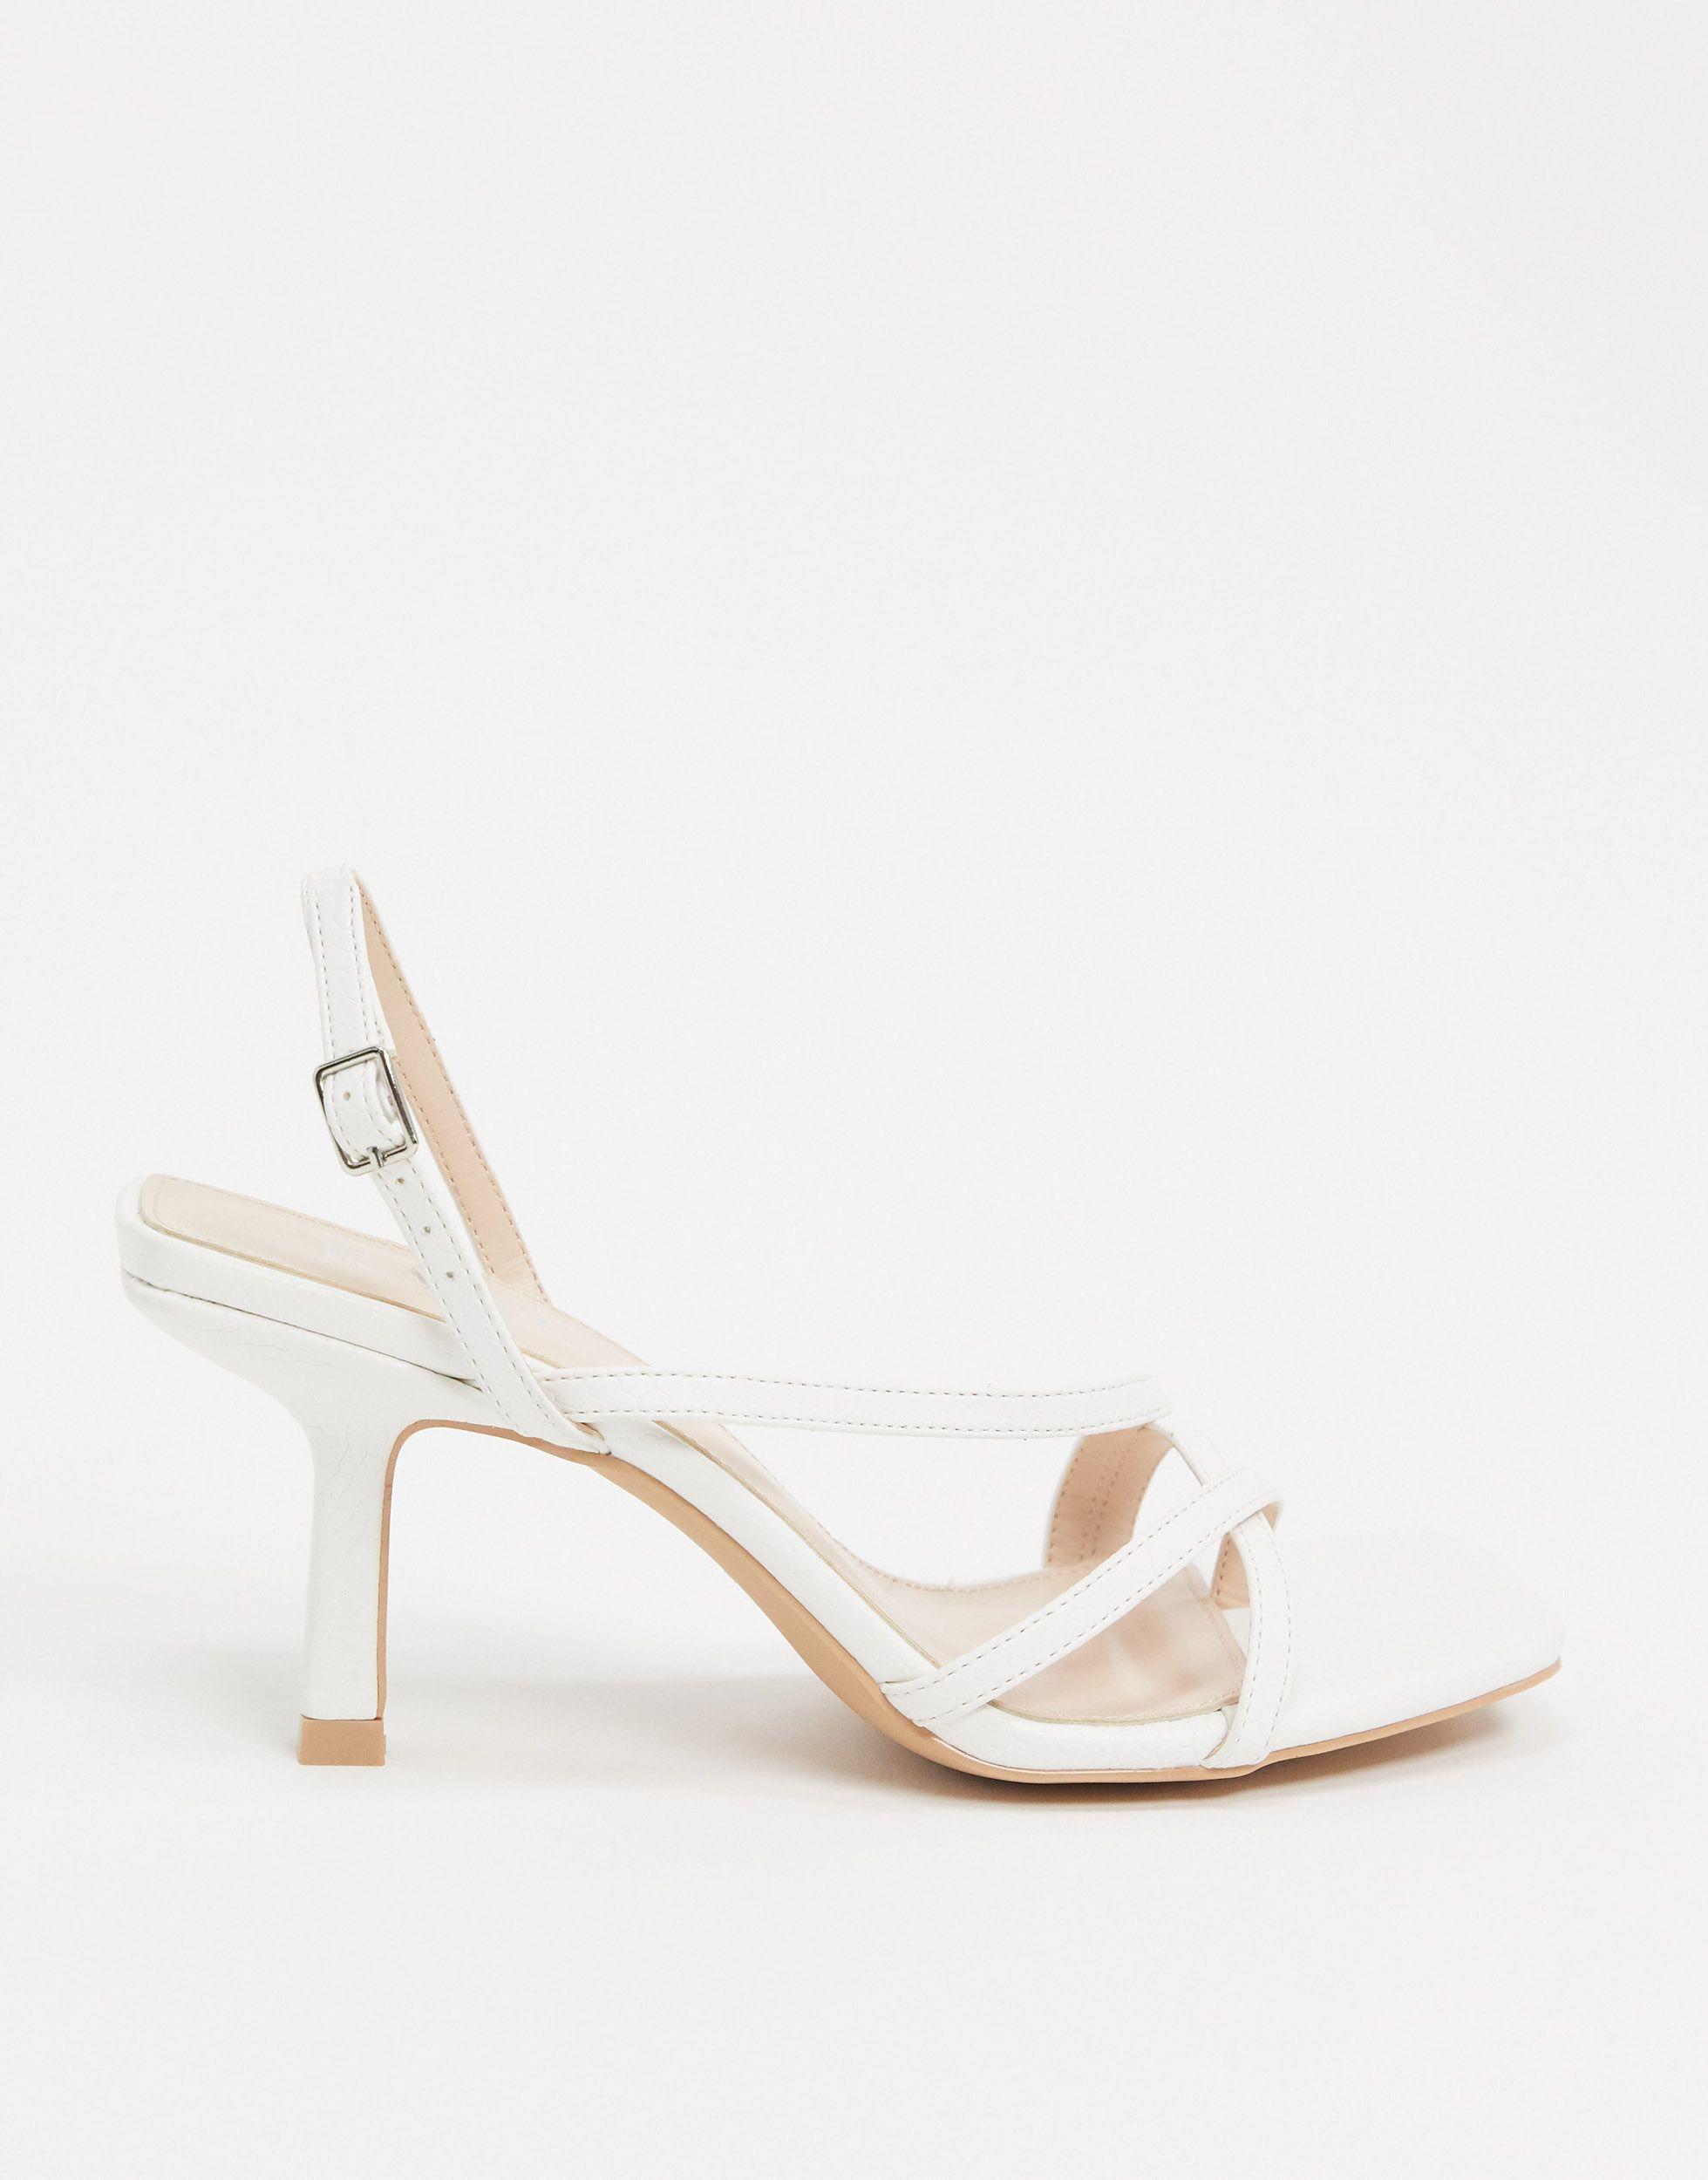 Paradox London Theresa Wide Fit Shimmer Kitten Heeled Sandals, Silver at  John Lewis & Partners